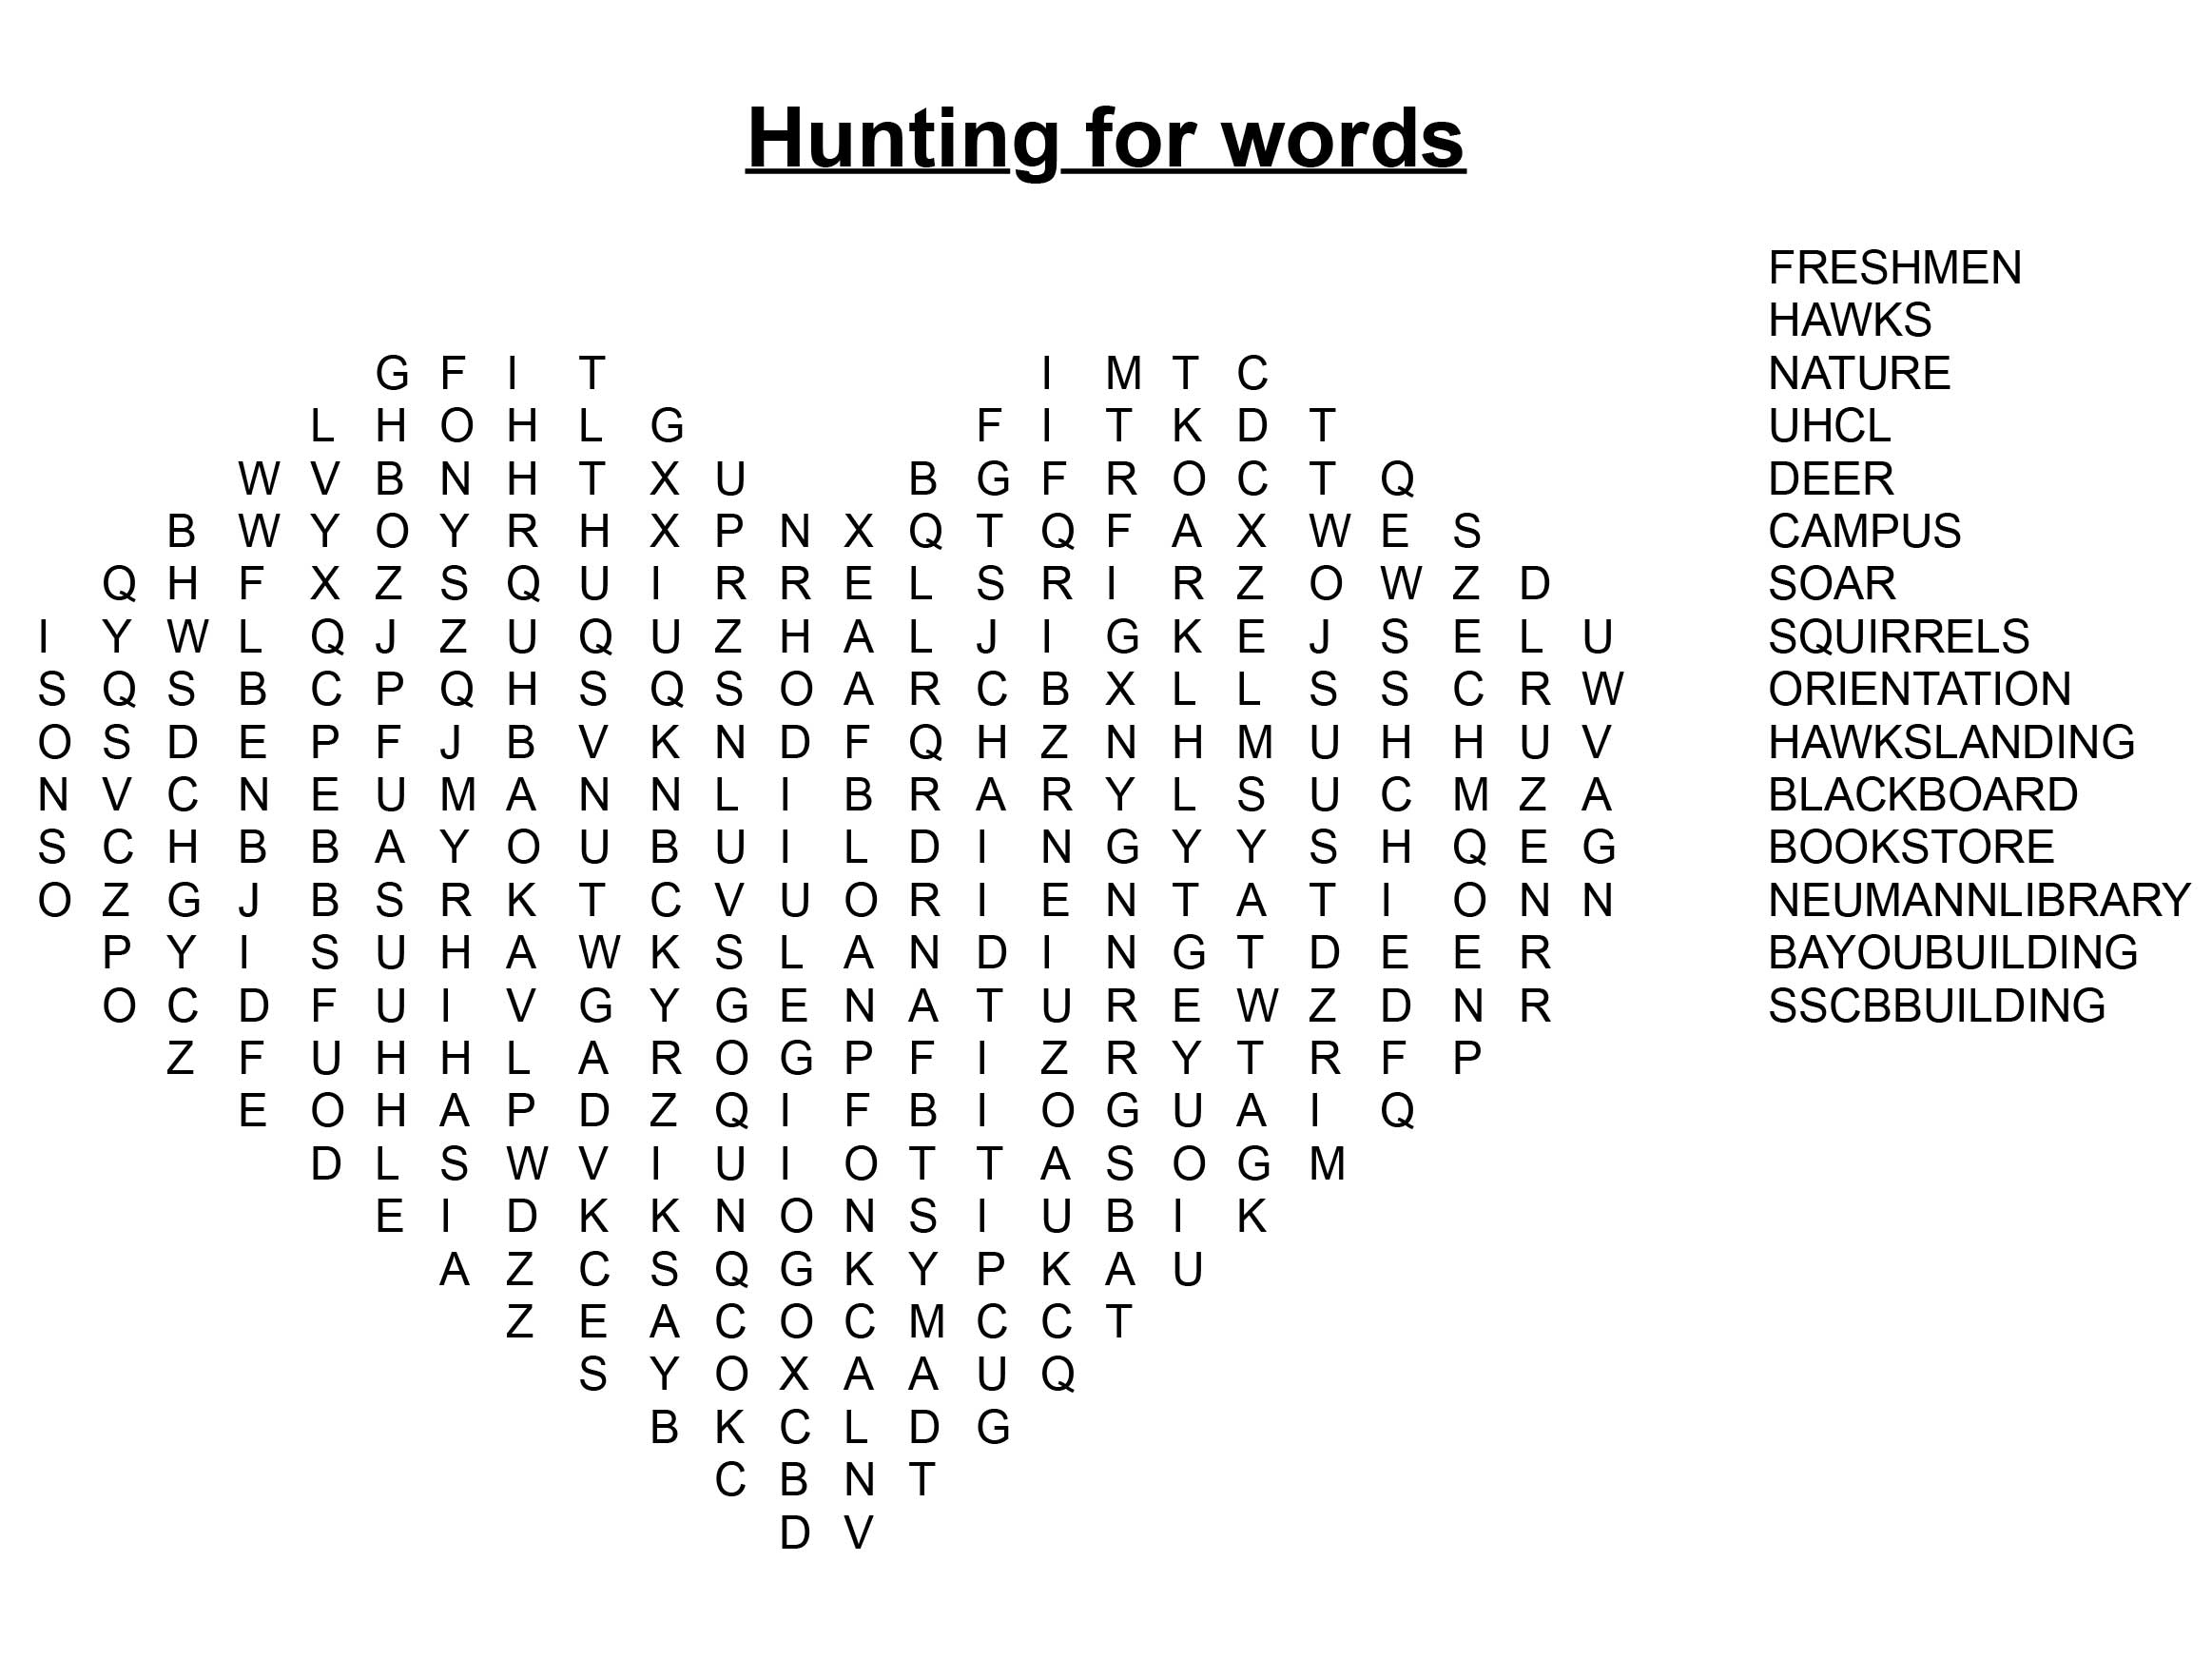 GRAPHIC: Hunt for words in our UHCL themed word search!